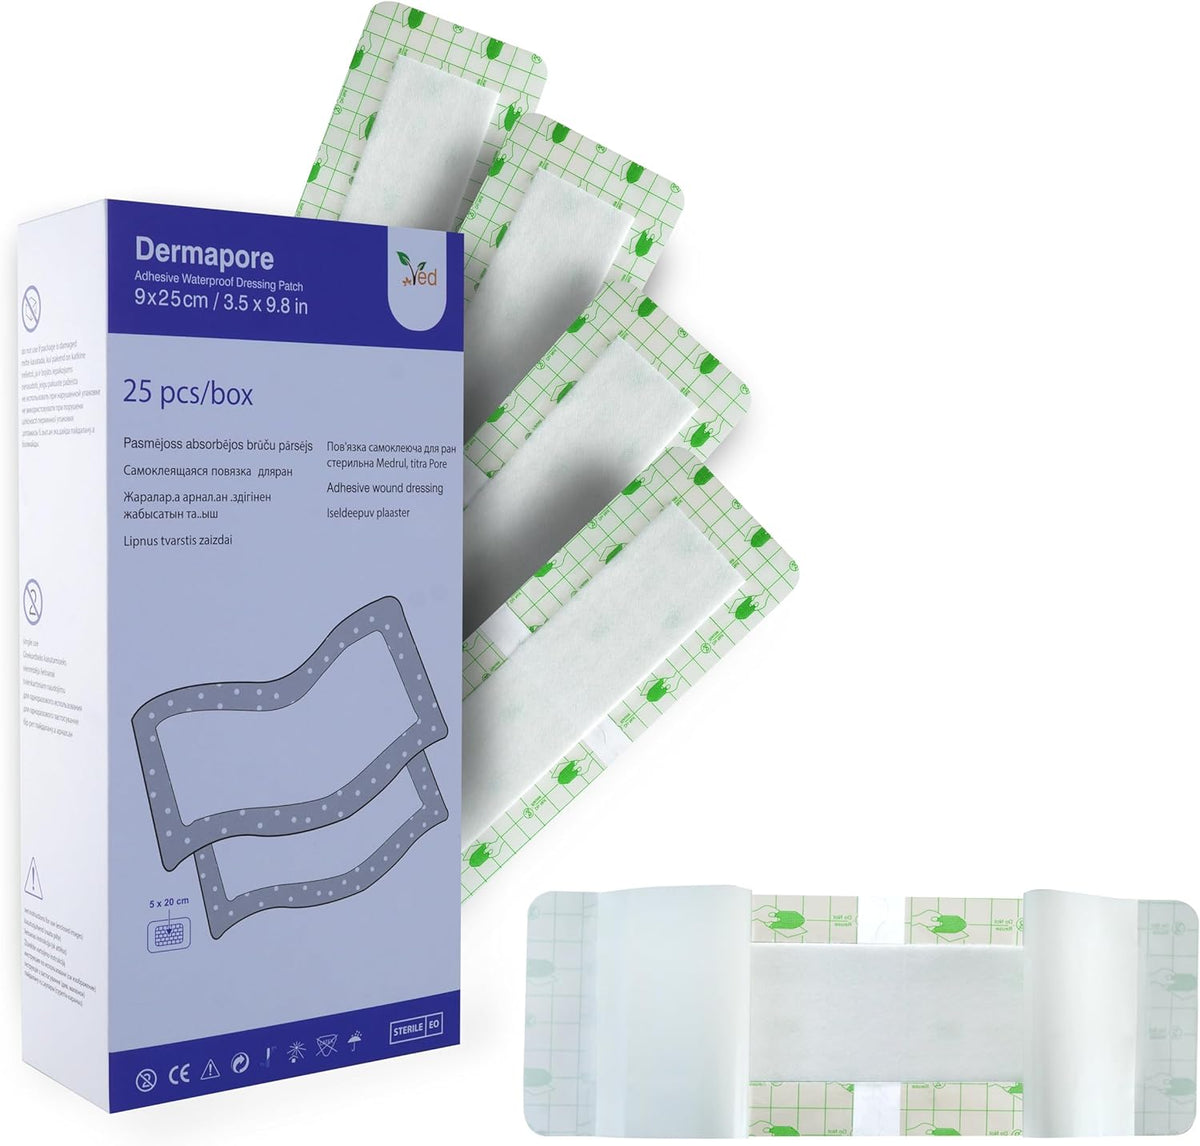 VED Dermapore Waterproof Adhesive Wound Dressing- Suitable for cuts and grazes, Diabetic Leg ulcers, venous Leg ulcers, Small Pressure sores- Medium, 9 x 25cm (Pack of 25).